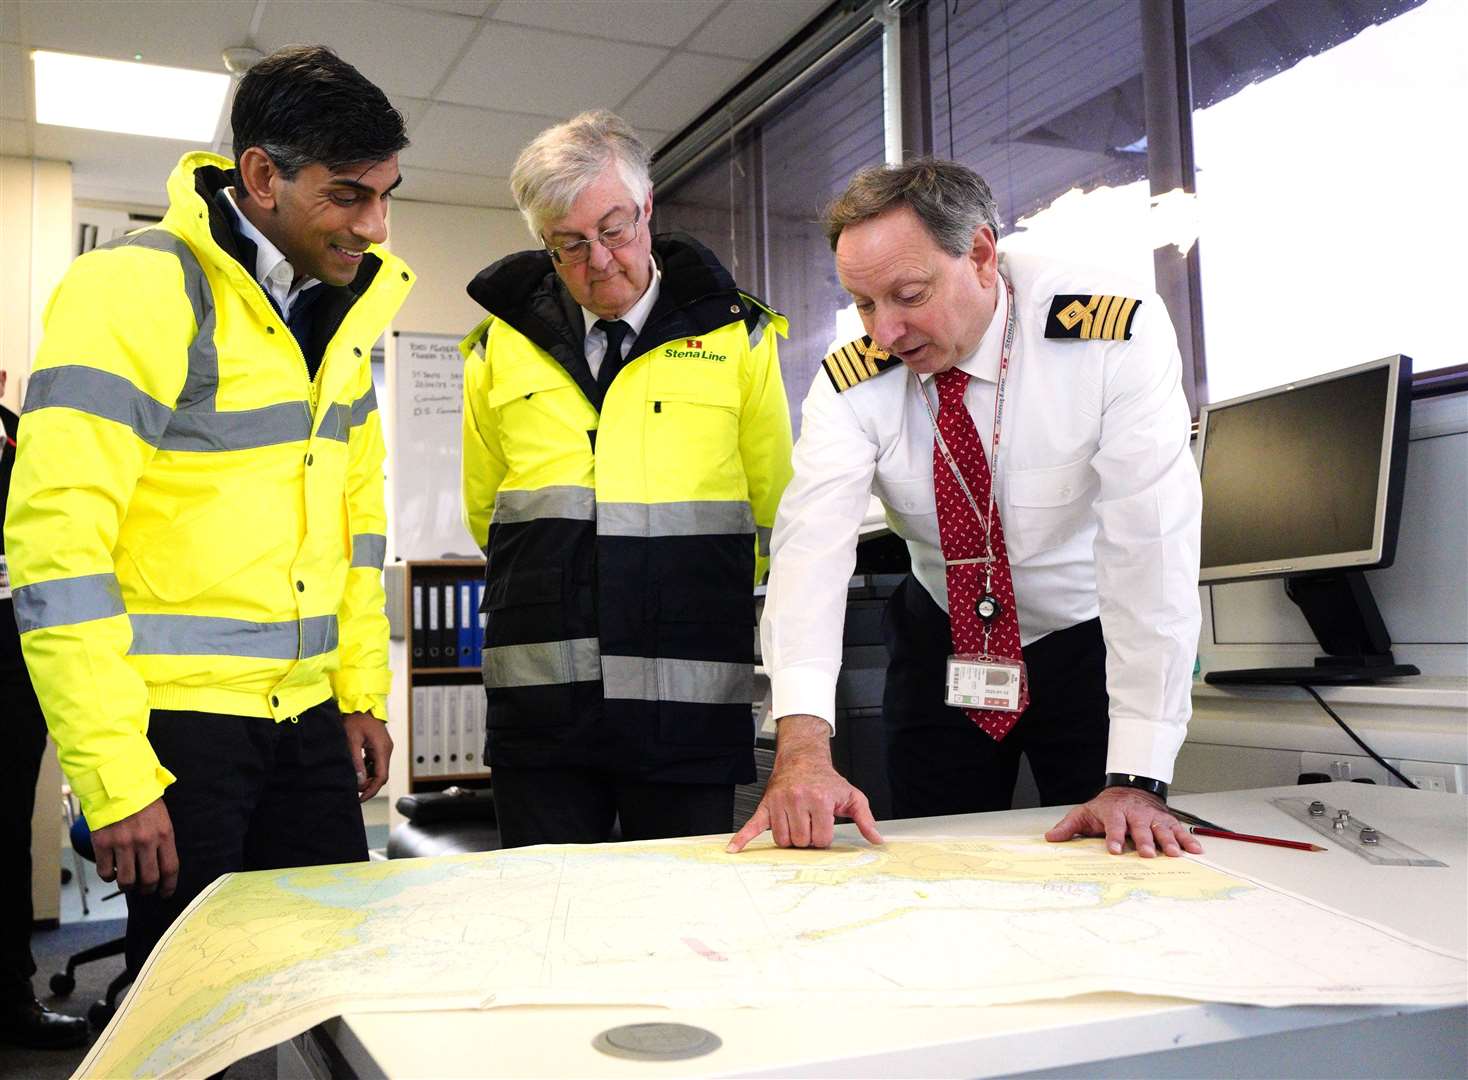 (left to right) Prime Minister Rishi Sunak and First Minister of Wales Mark Drakeford with John Goddard harbour master looking at charts during a visit to the Port of Holyhead in Anglesey (Peter Byrne/PA)